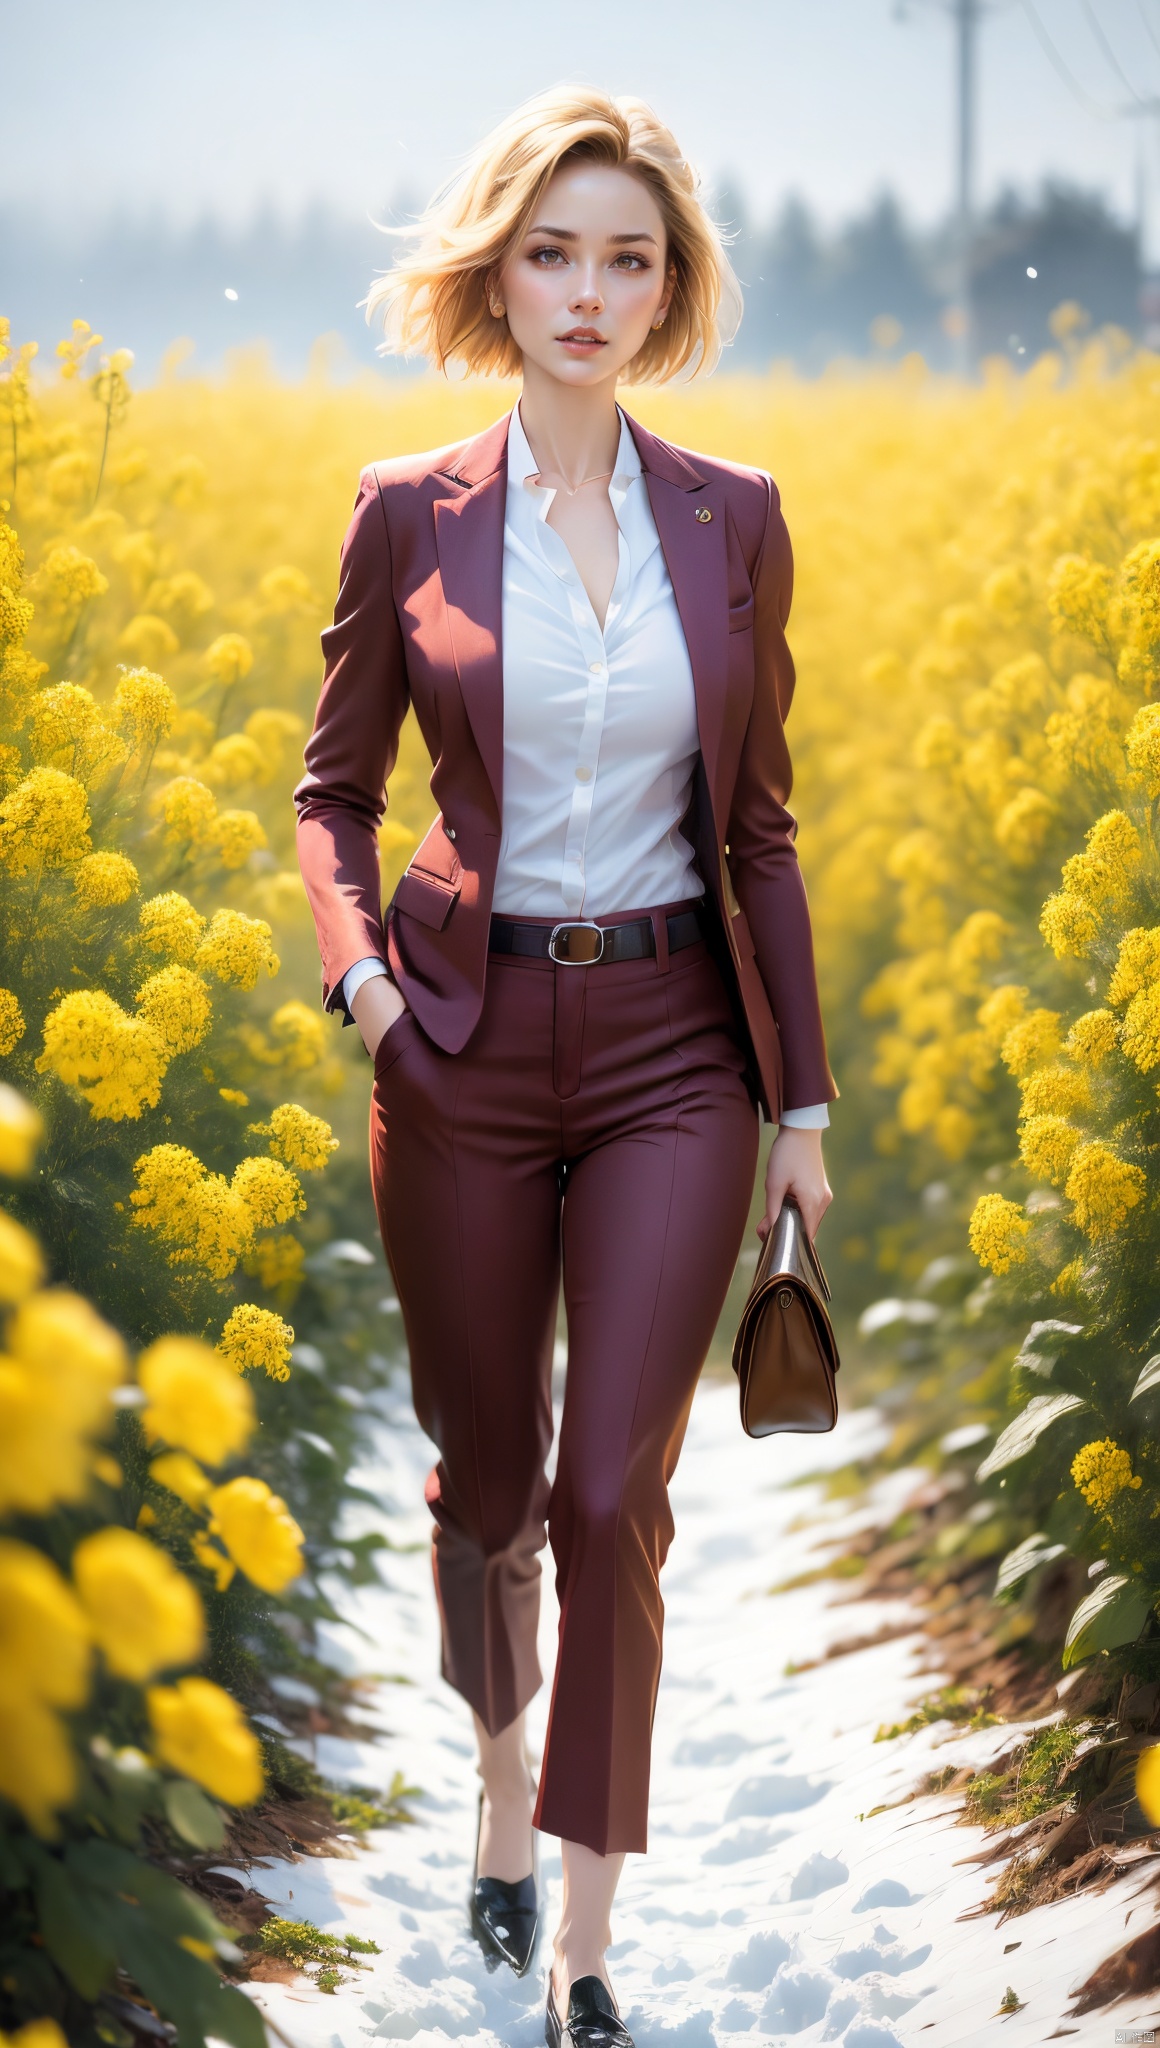 A woman in a red suit, short blond hair, standing gracefully in a field of canola flowers, snowflakes falling from the sky, snowflakes covering the earth, thick snow, a high-definition photo, an elegant woman, dressed in a red suit and blond hair, standing in a rape field, snowflakes falling, Snowflakes falling on the ground, this photo is popular on Artstation by Greg Rutkowski, a photorealist painting by Midtrip.